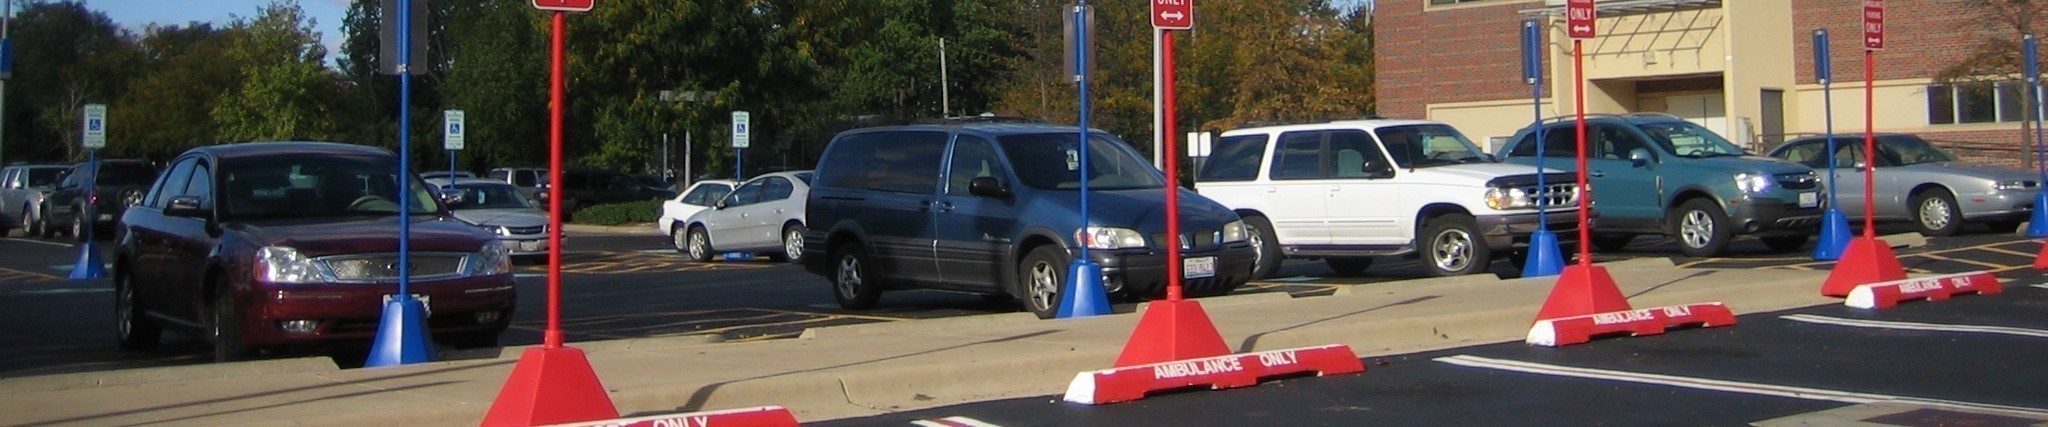 Image is of portable sign posts and bases on poles in a parking lot 